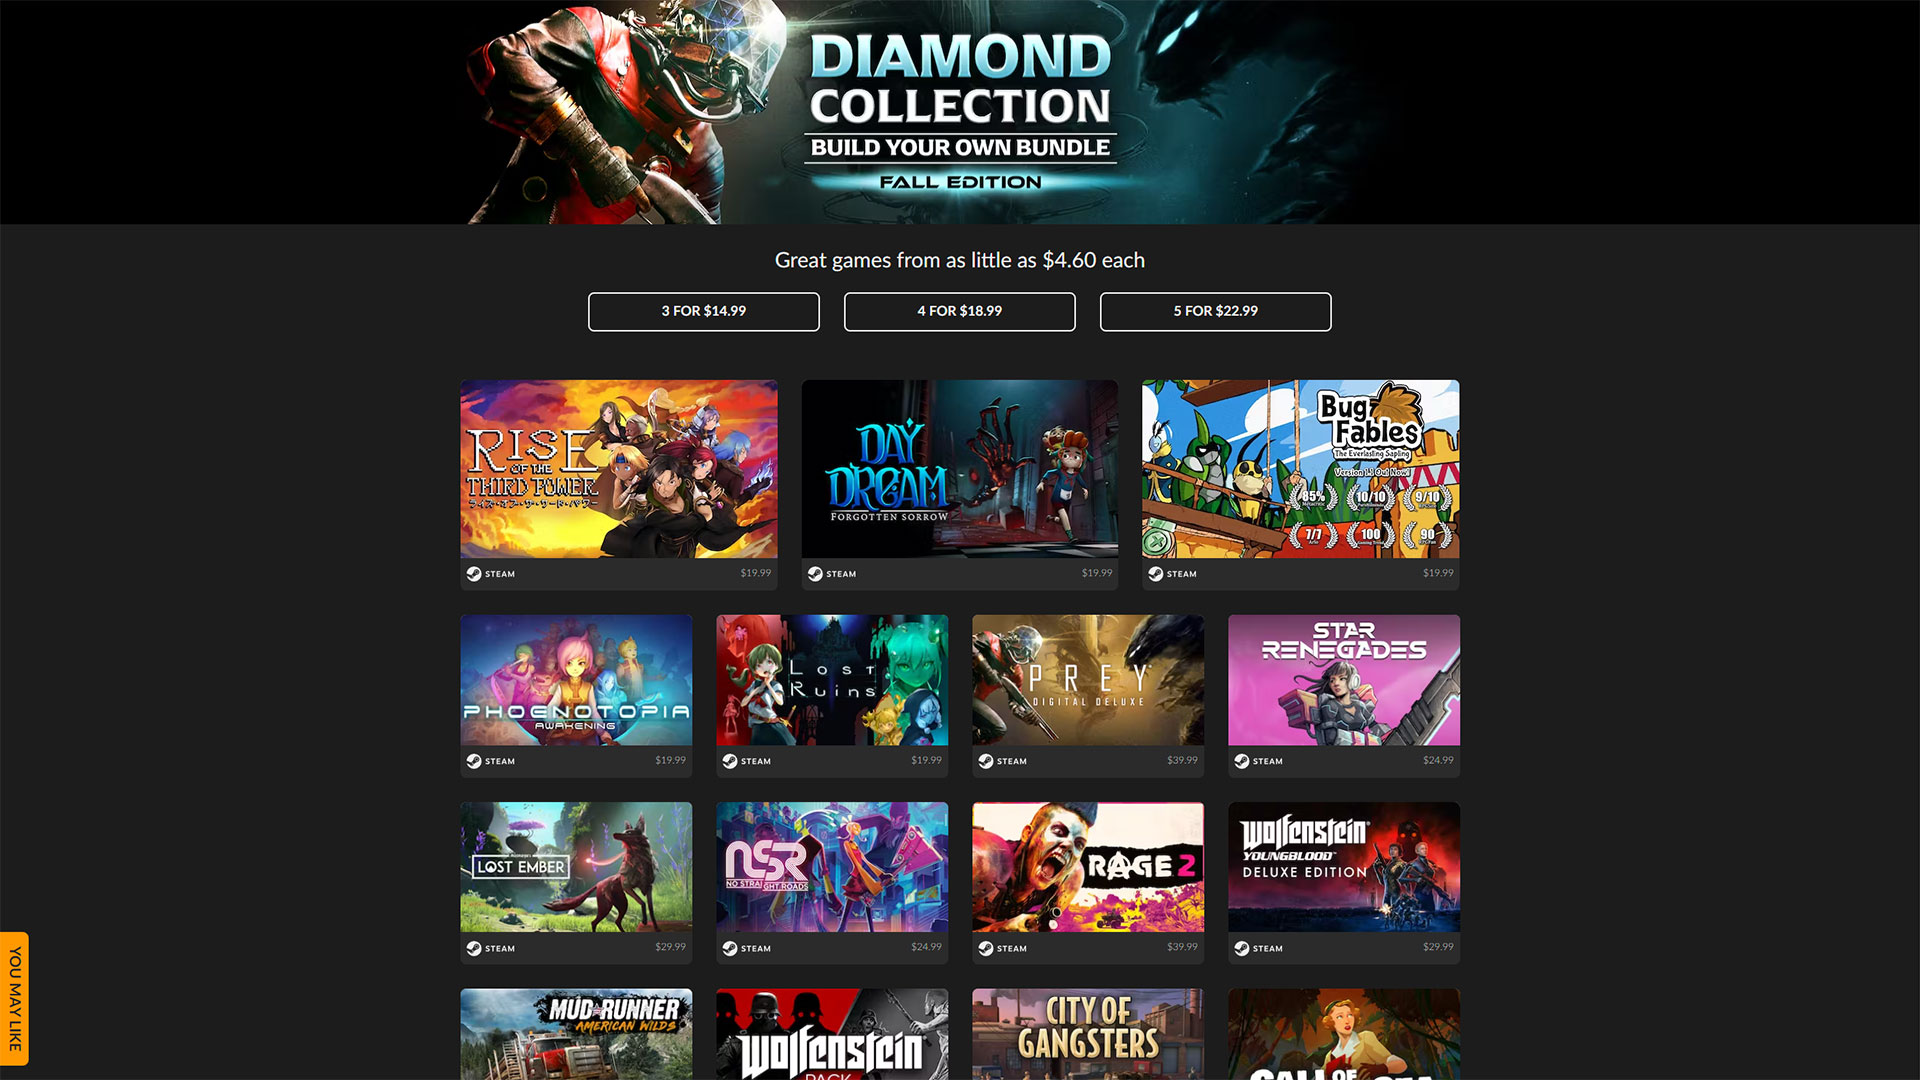 The Diamond Collection Build Your Own Bundle Fall Edition is now available at Fanatical